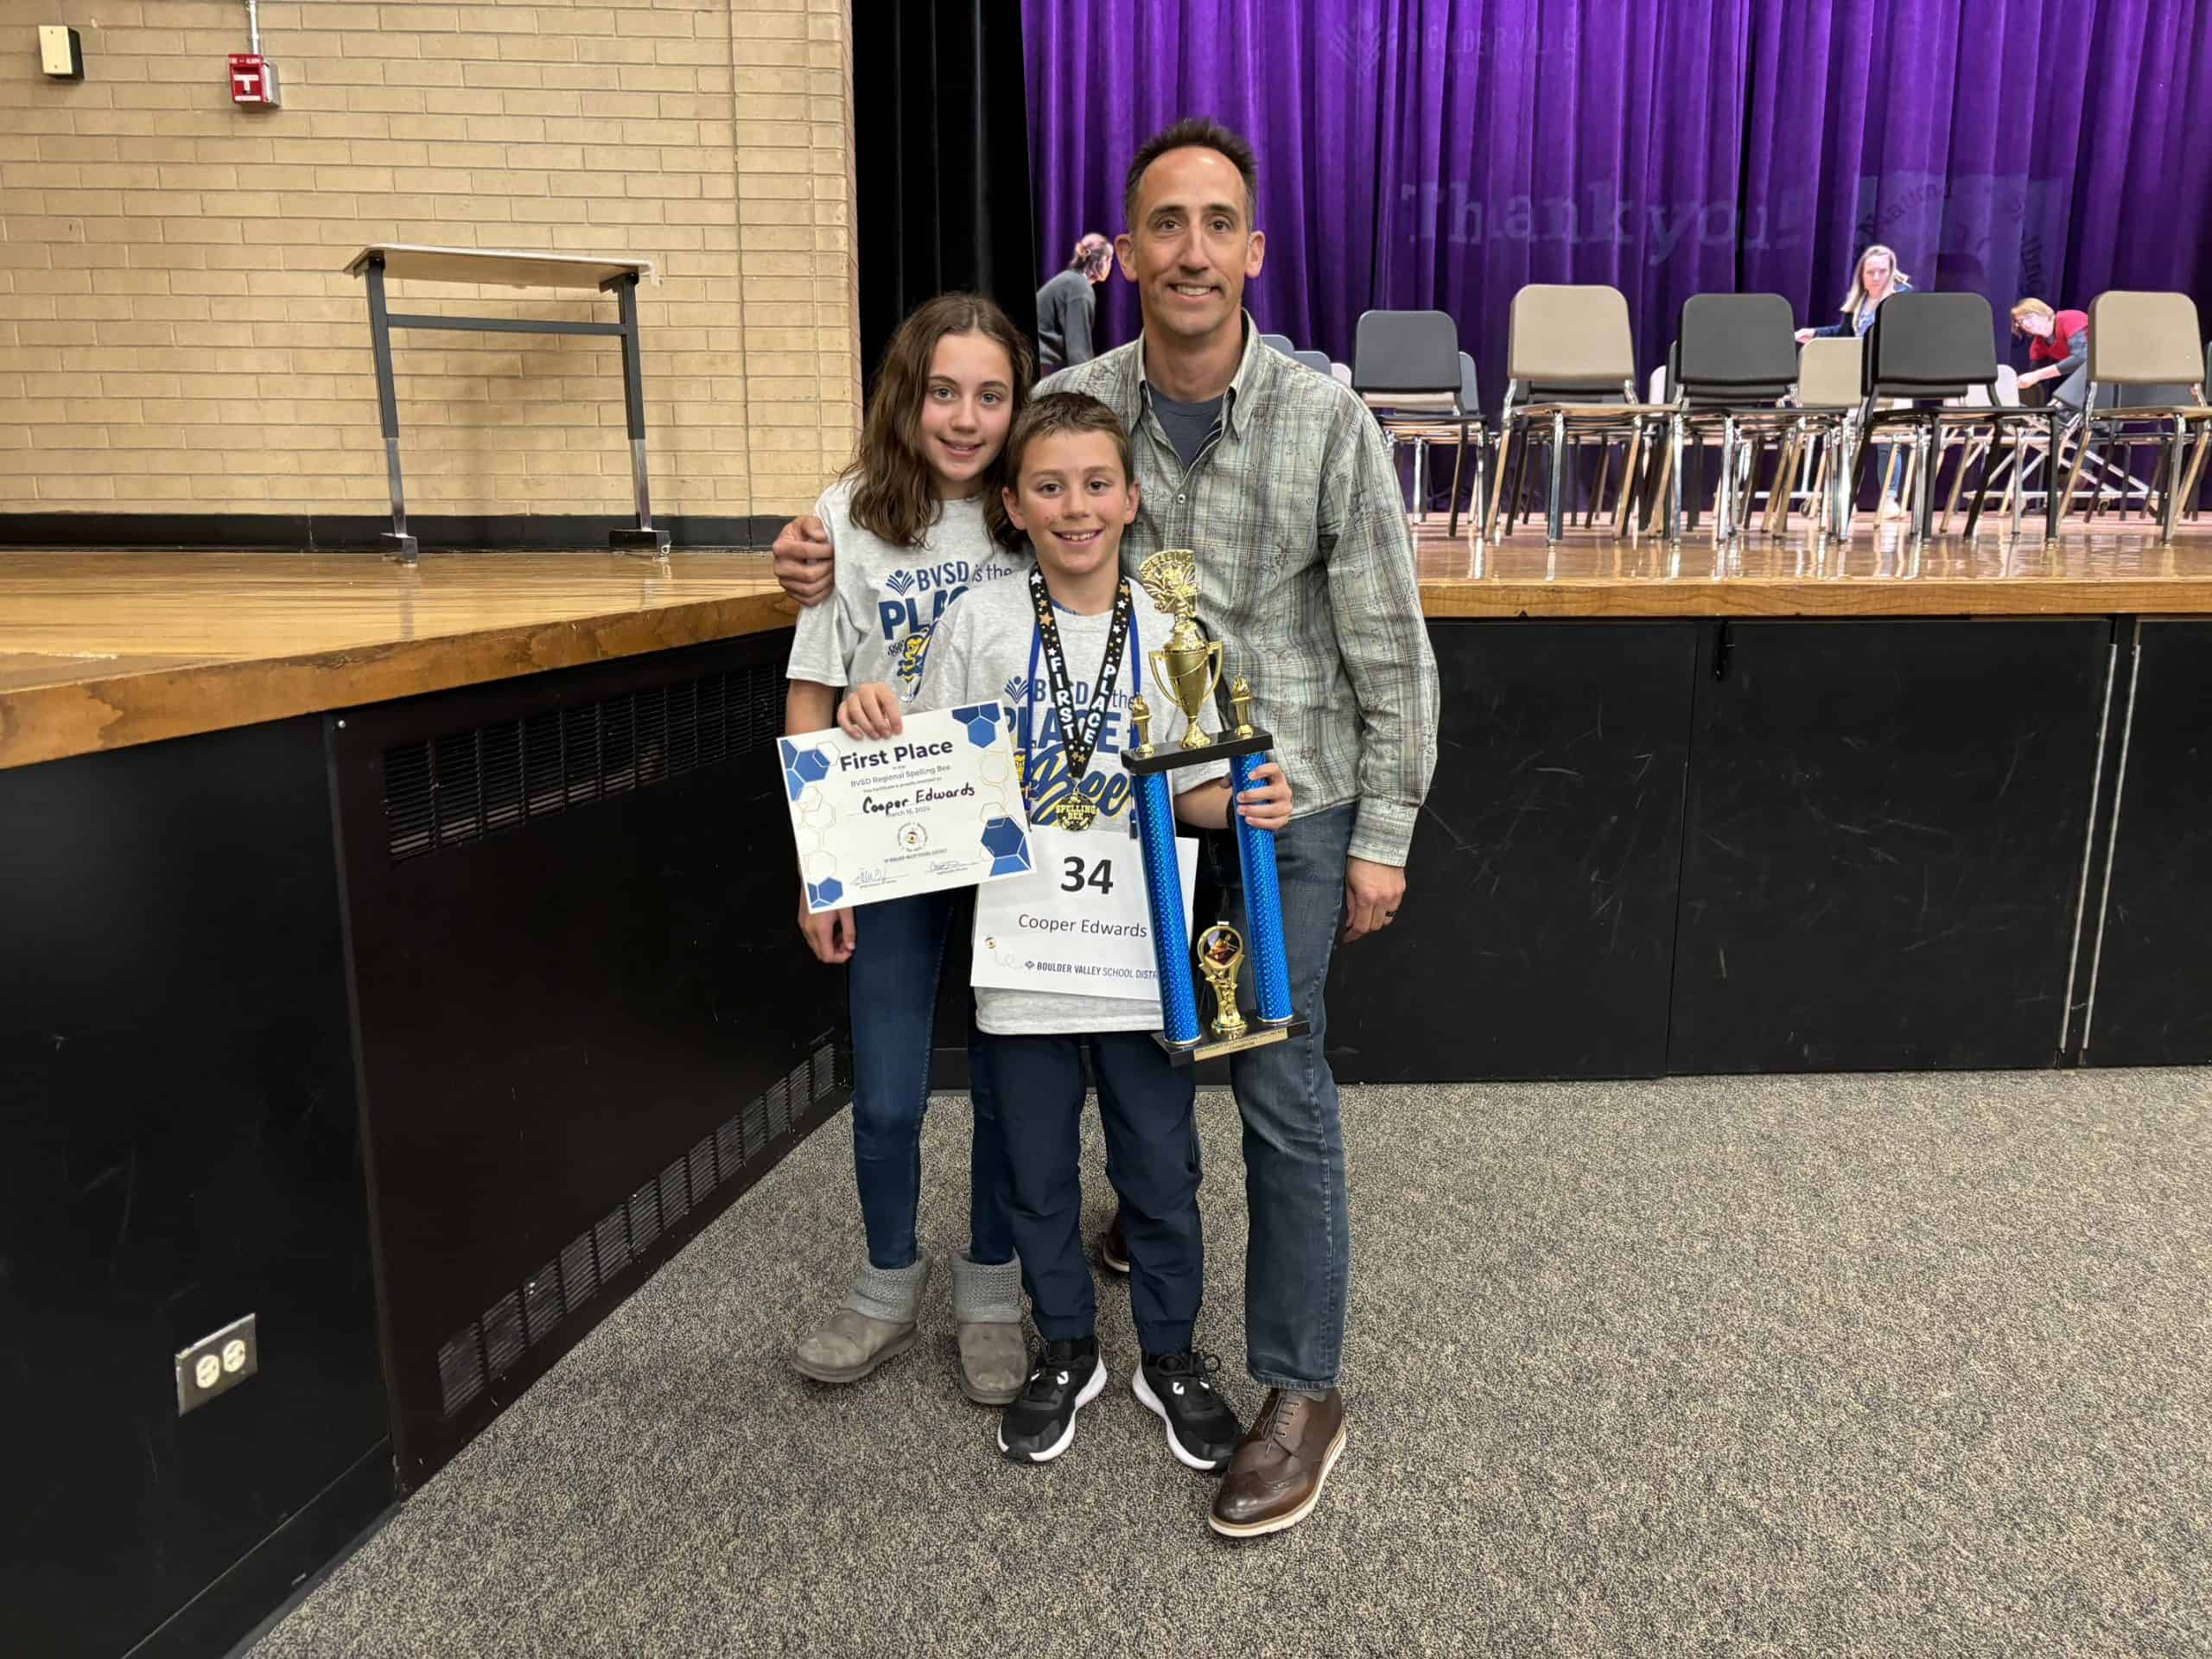 Cooper's 7th grade sister on the left, Cooper in the middle front, and Cooper's dad on the right. Standing and smiling at the camera. Cooper is holding an award and first place trophy for winning the regional spelling bee.